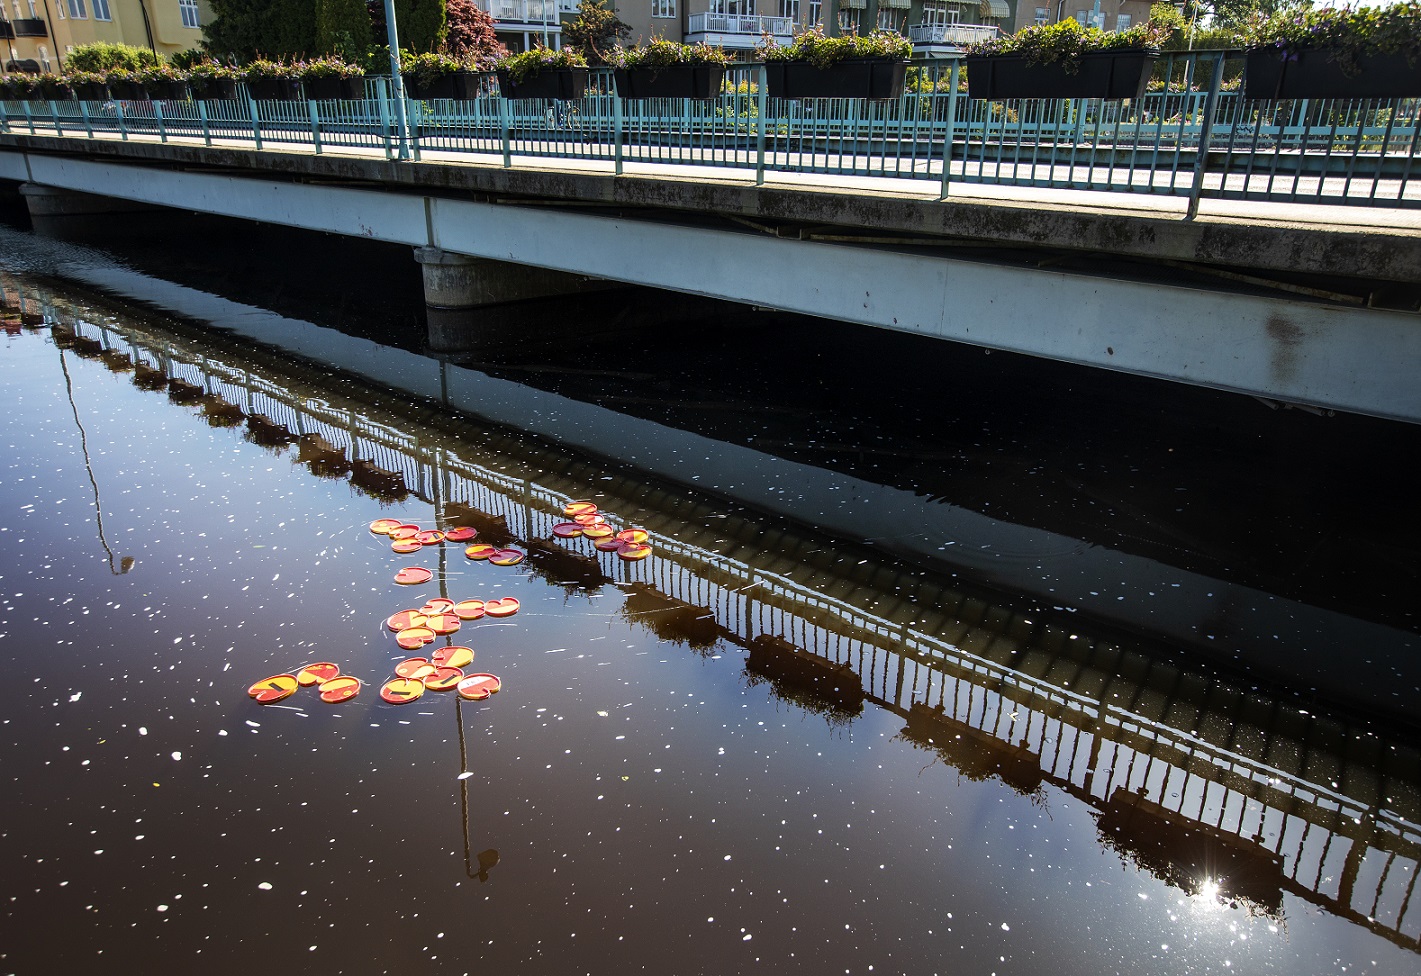 Water lilies made of warning signs float on the surface of the water next to a bridge.